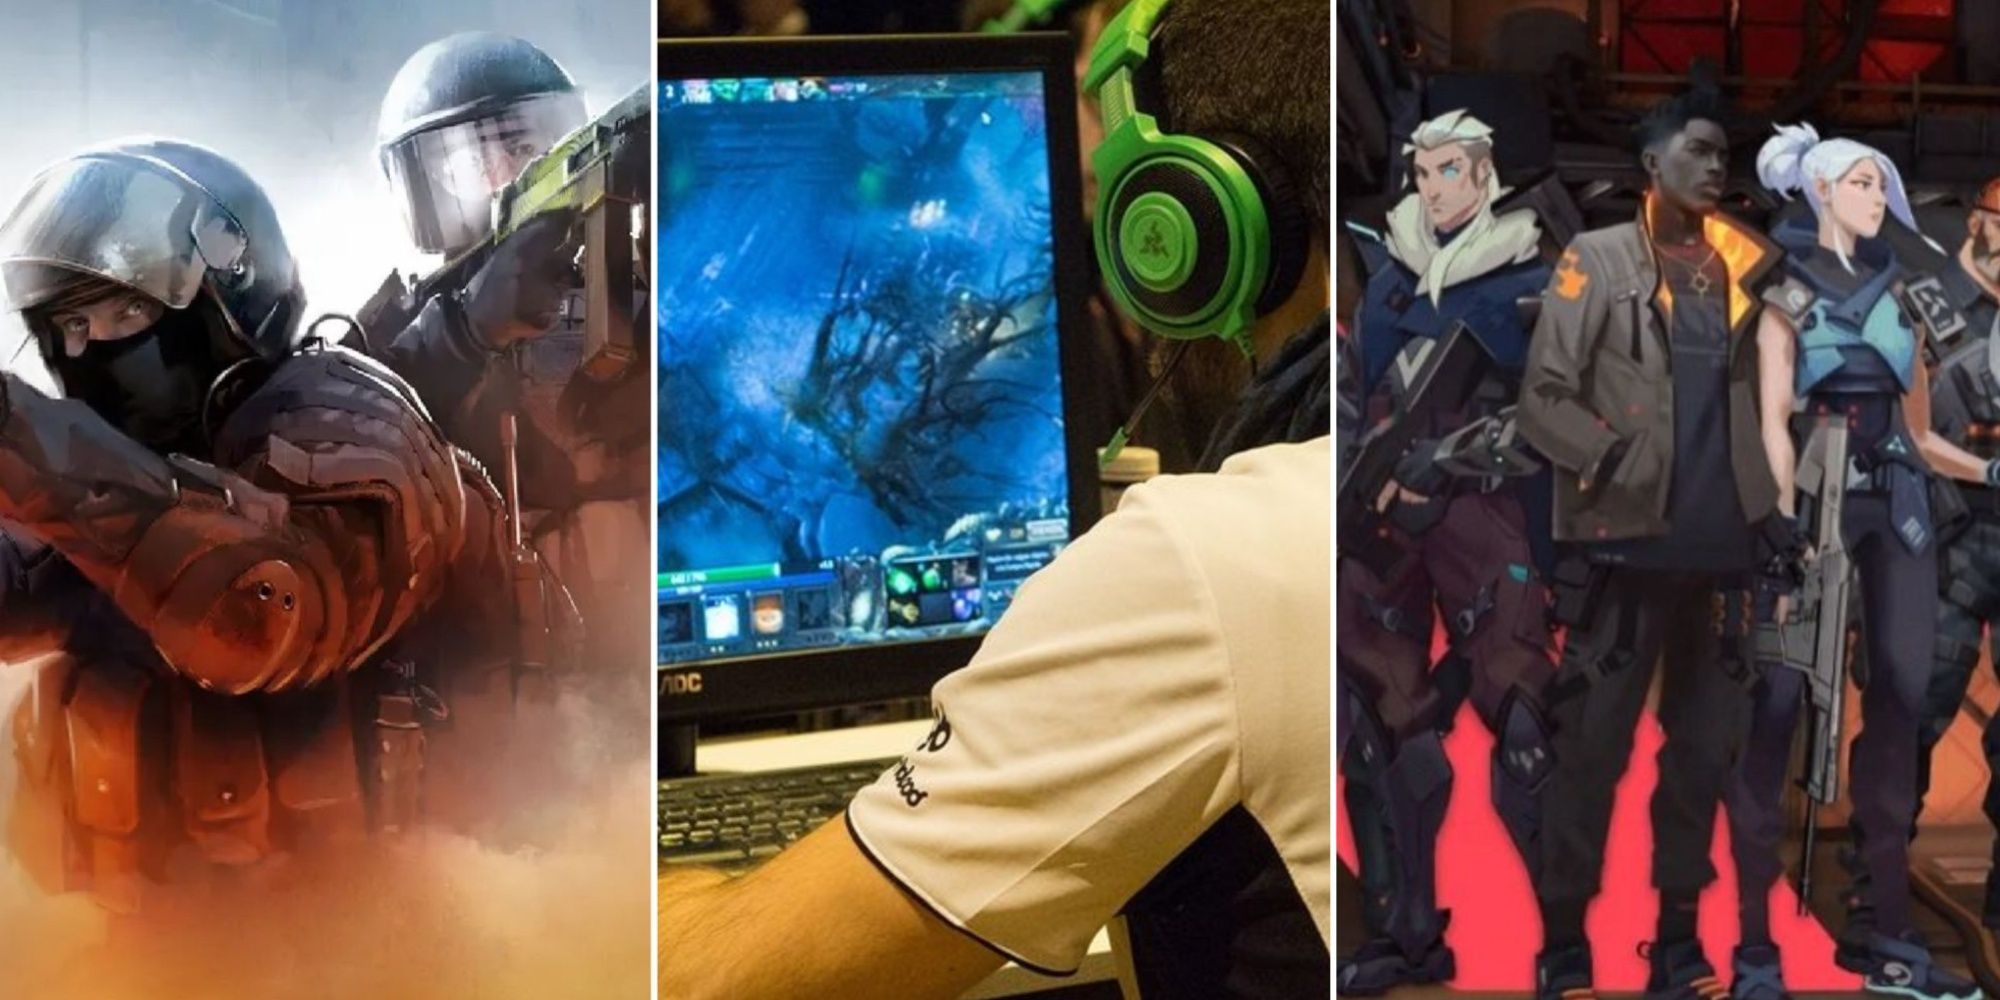 Cover Image For Most Popular E-Sports Titles With A Dota 2 Player, Valorant Agents, And CSGO Promo Image